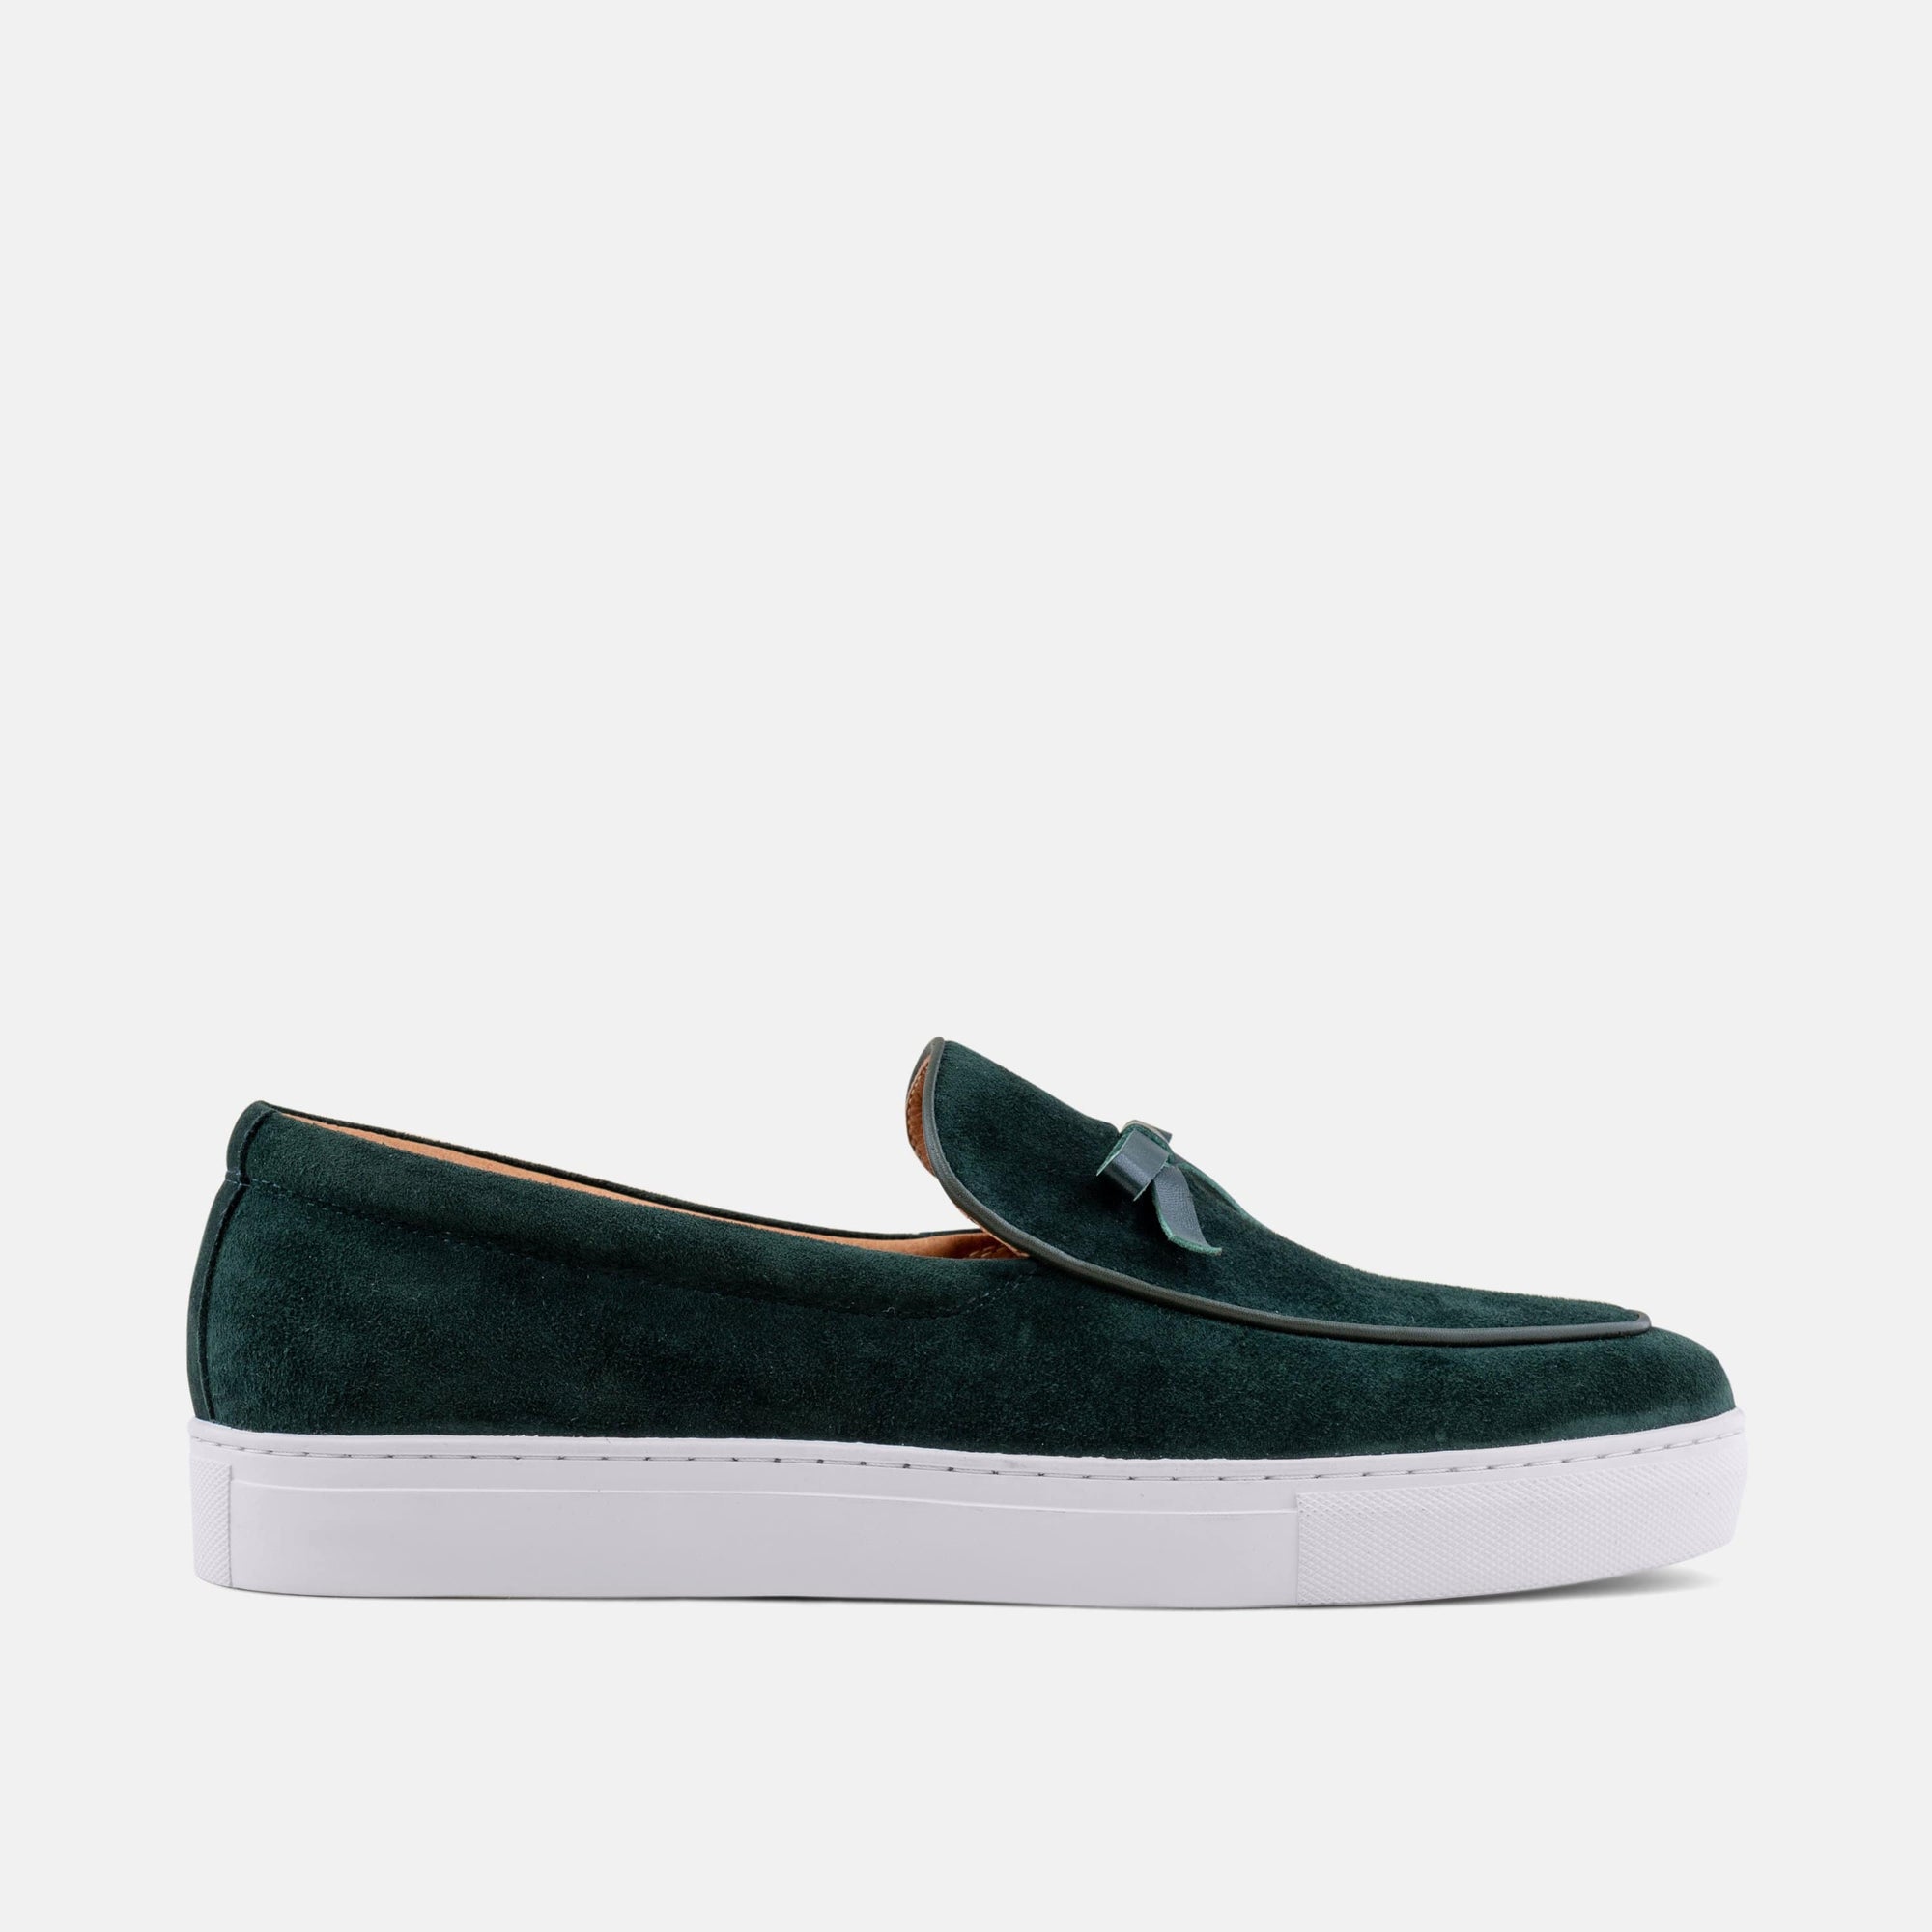 Odell Sacramento Green Leather Belgian Loafer Sneakers